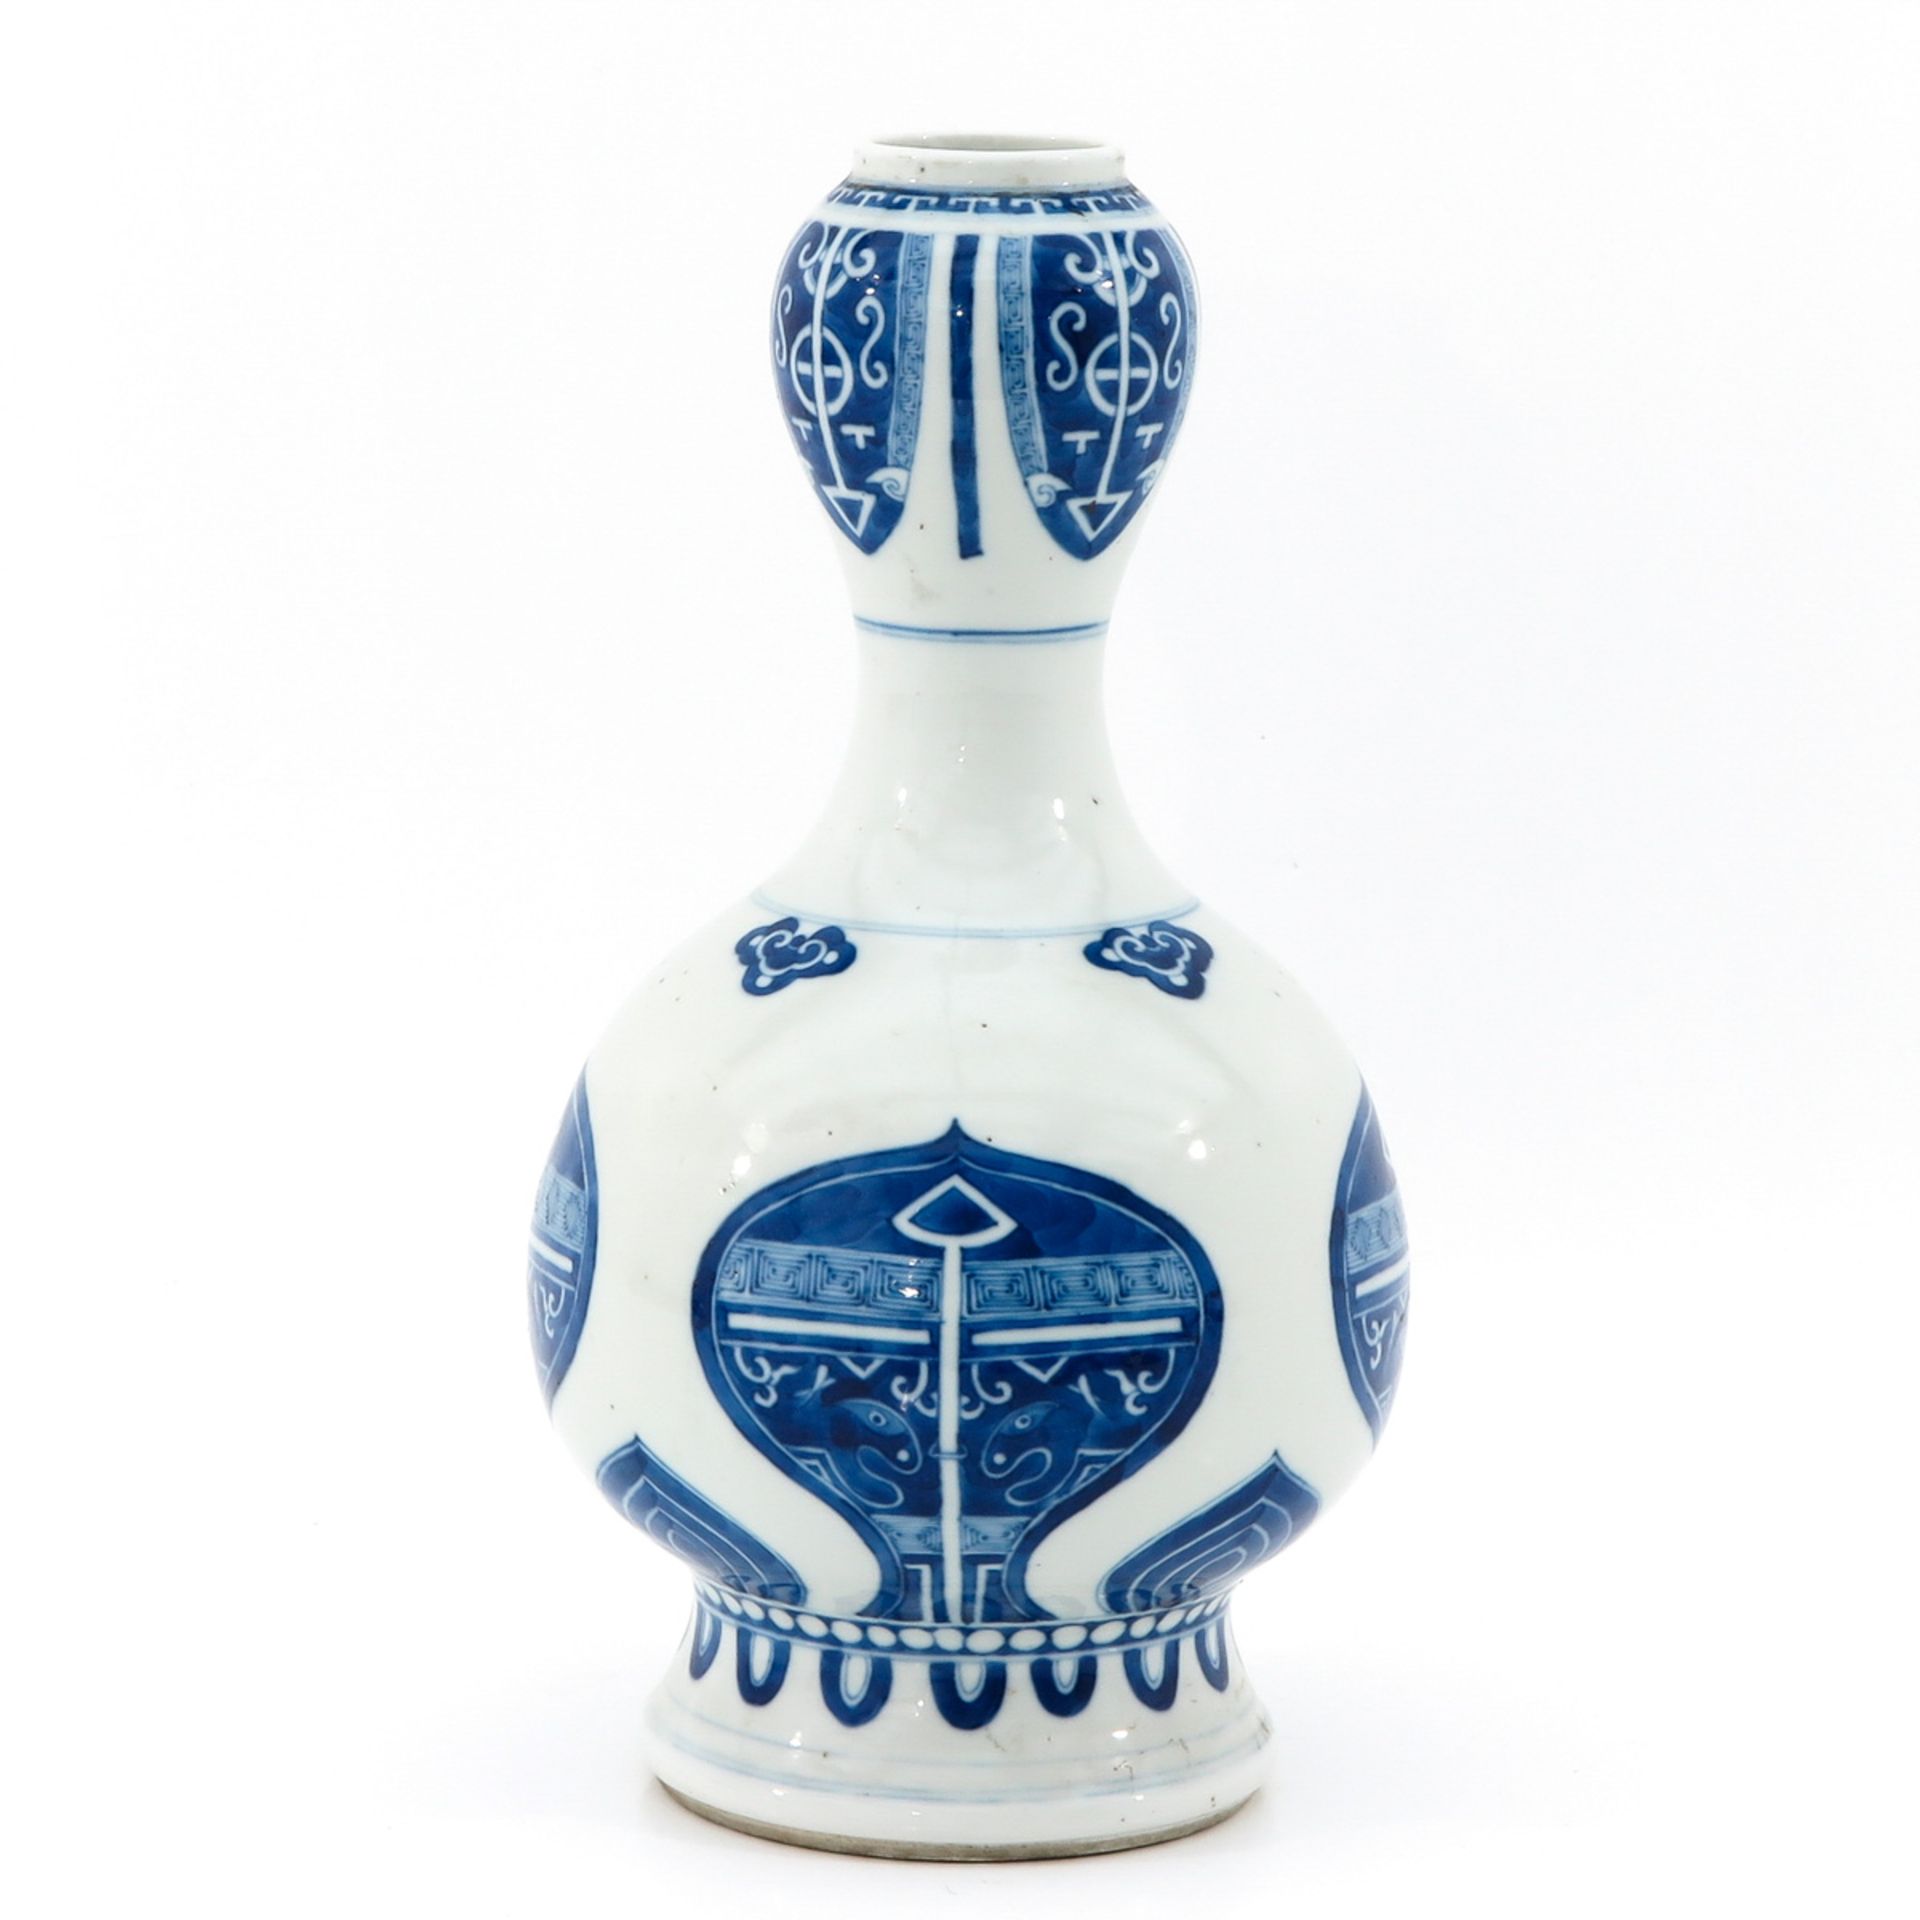 A Blue and White Garlic Mouth Vase